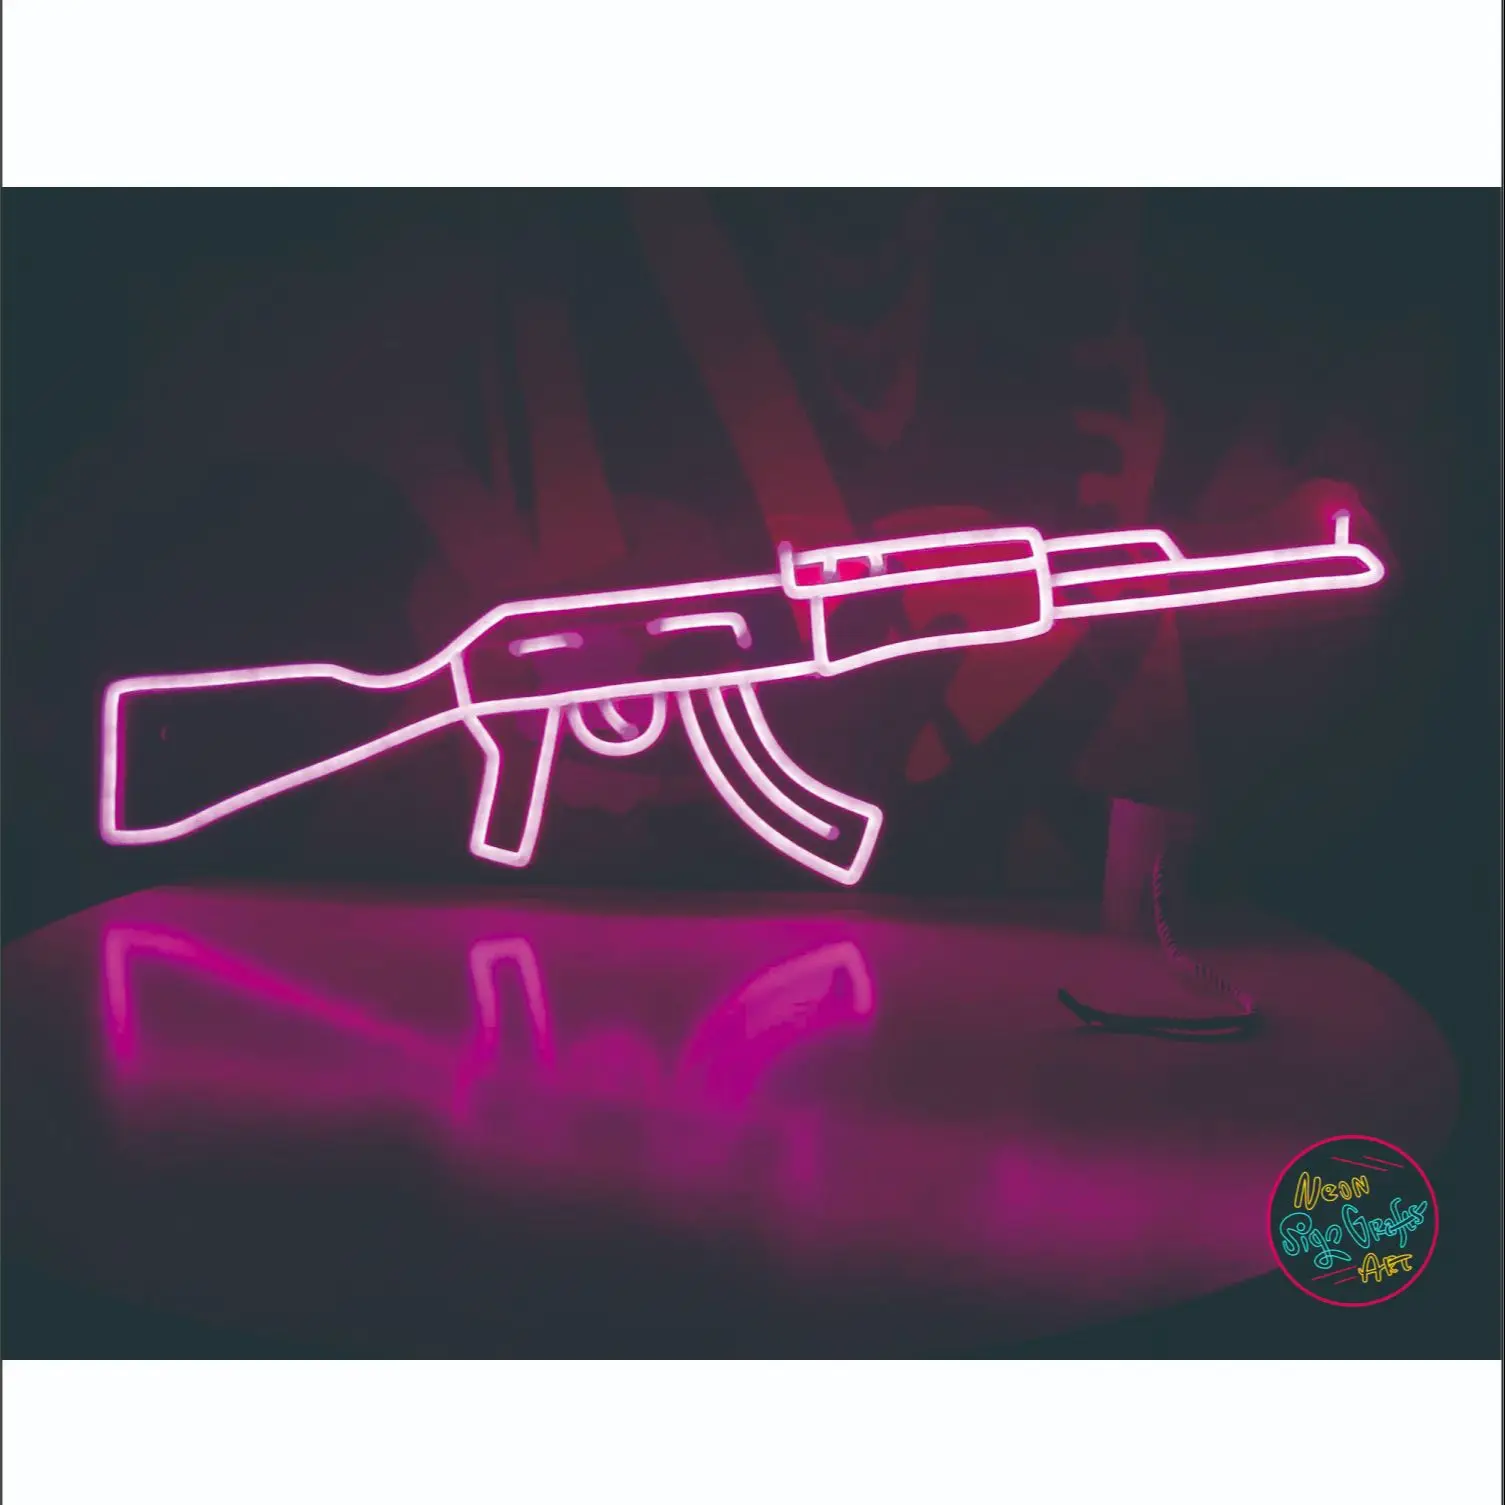 AK47 Gun Neon Signs,Party Decor Light Signs,Event Lights,Birthday Gifts,Custom Neon Signs,Wedding Neon Signs,Personalized Lights